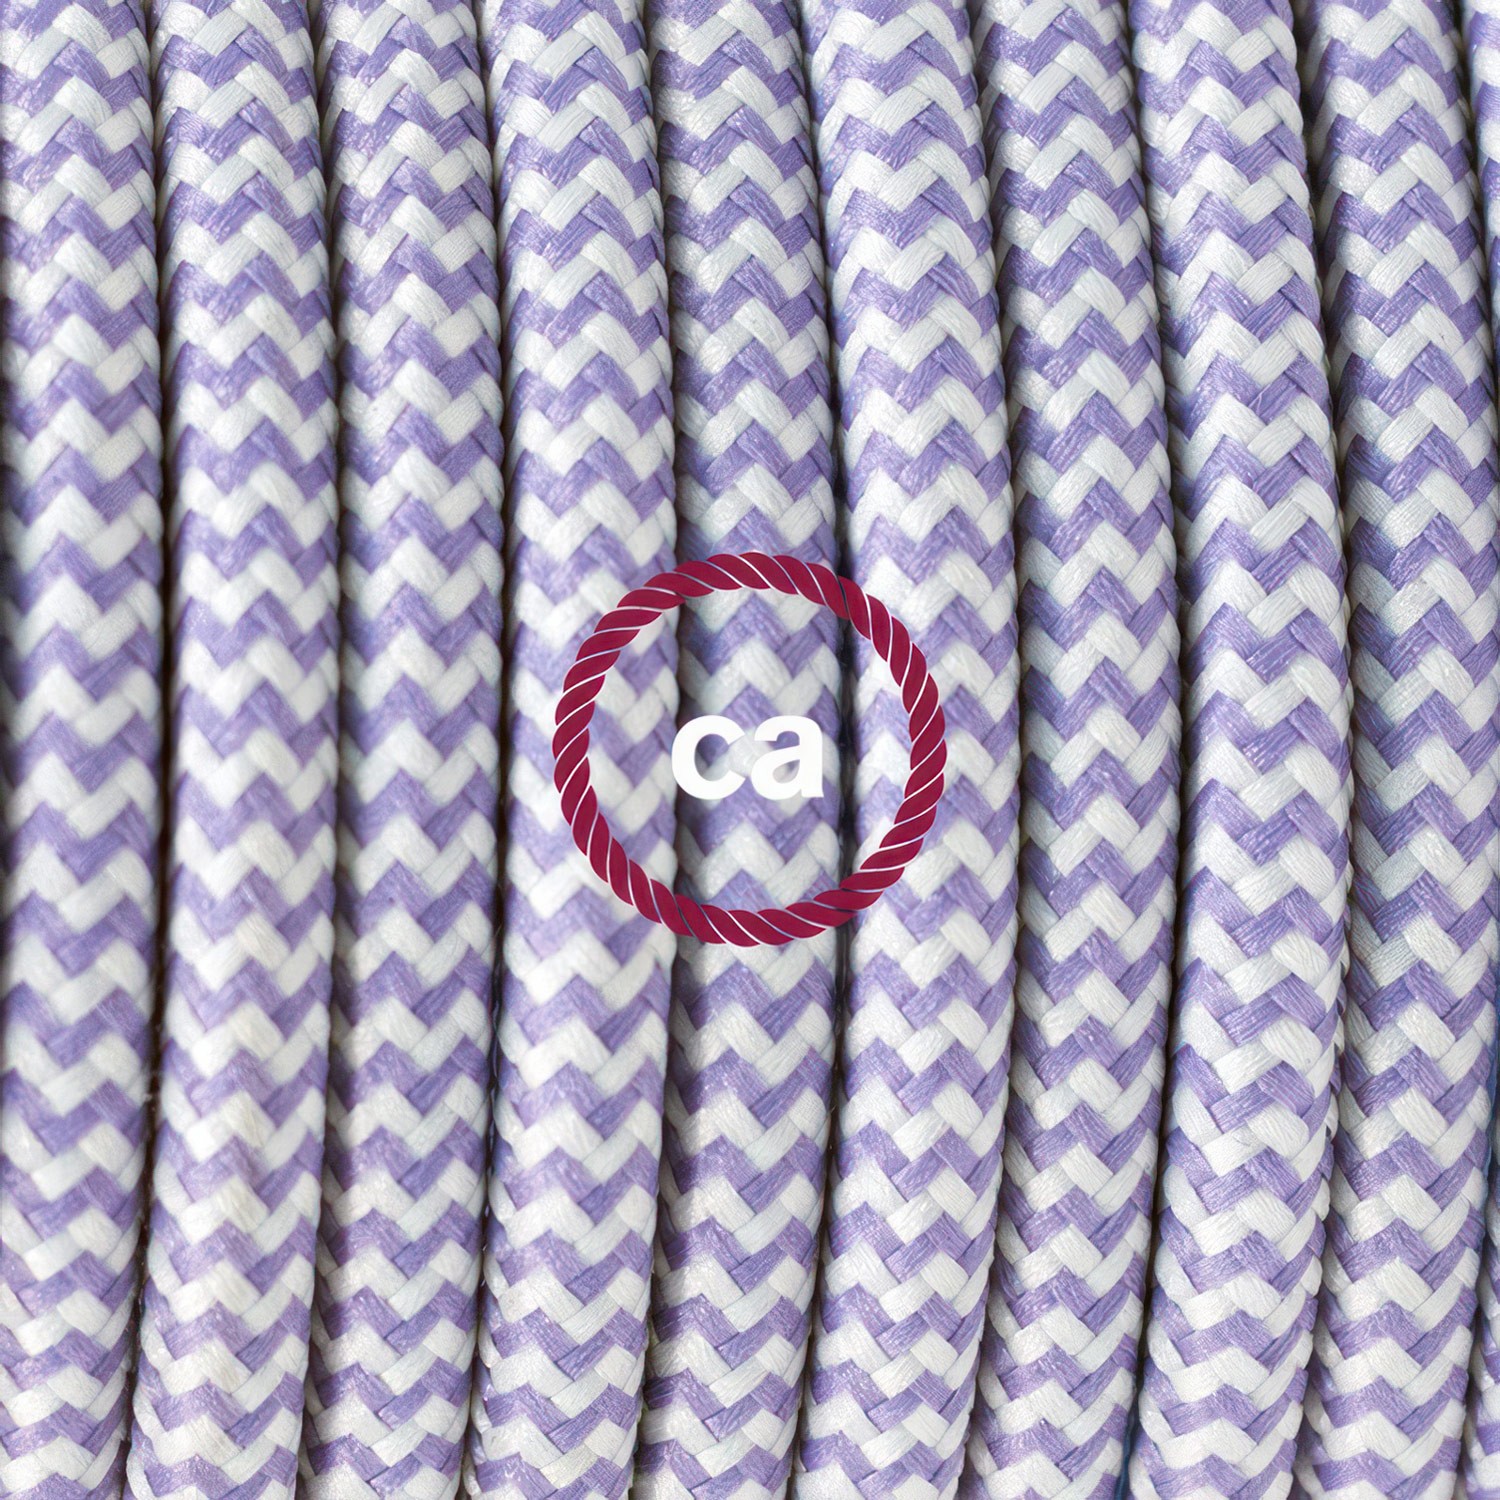 Wiring Pedestal, RZ07 Lilac ZigZag Rayon 3 m. Choose the colour of the switch and plug.